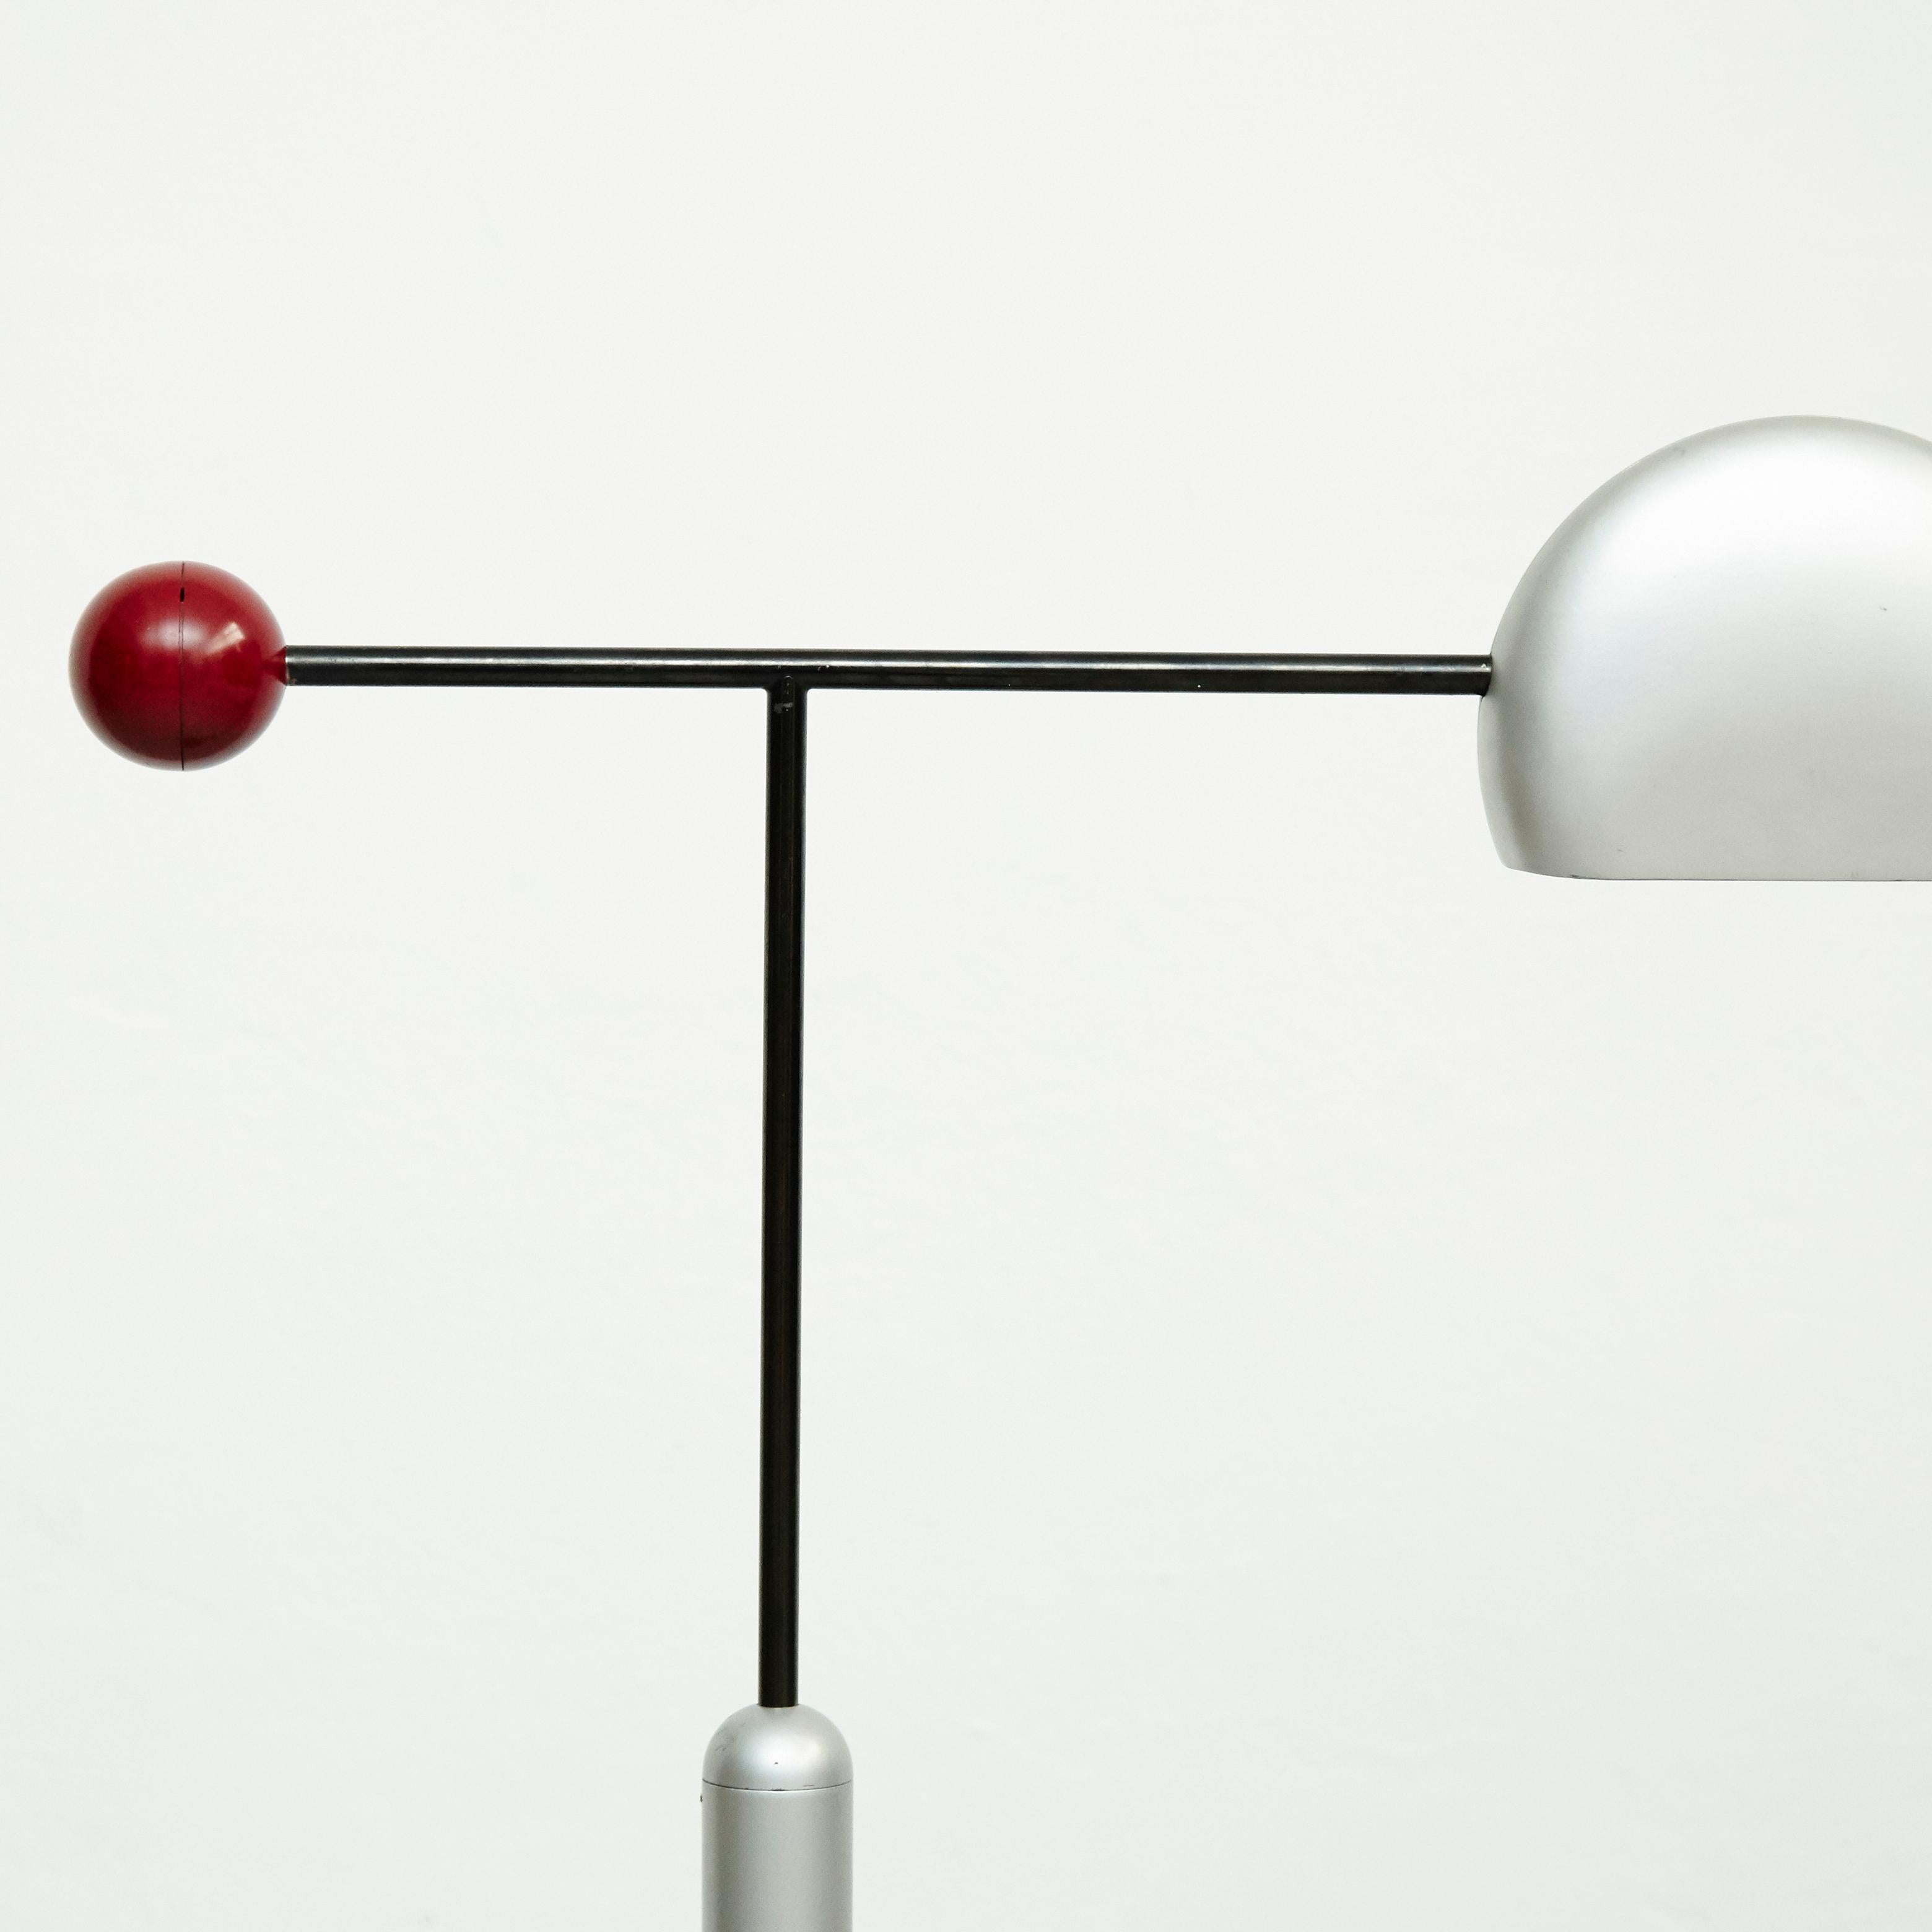 Floor Lamp designed by Toshiyuki Kita, circa 1980.
Manufactured by Luci, Italy.
In original condition, with minor wear consistent with age and use, preserving a beautiful patina.
 
Materials:
Iron
Plastic
Steel

Dimensions:
D 65 cm x W 35